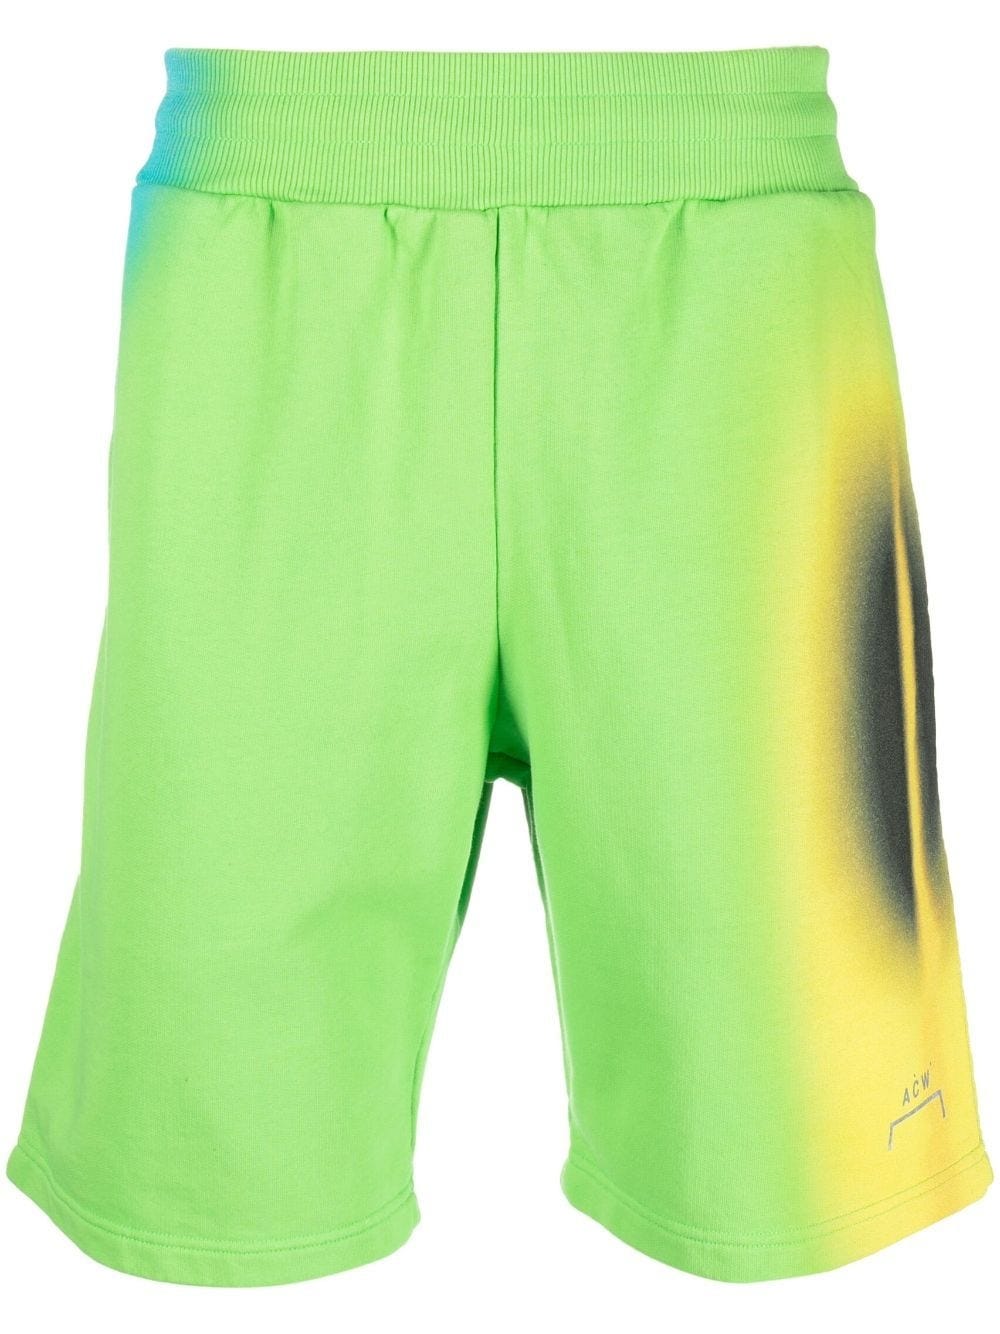 A-COLD-WALL* MULTICOLOR SPORT SHORTS